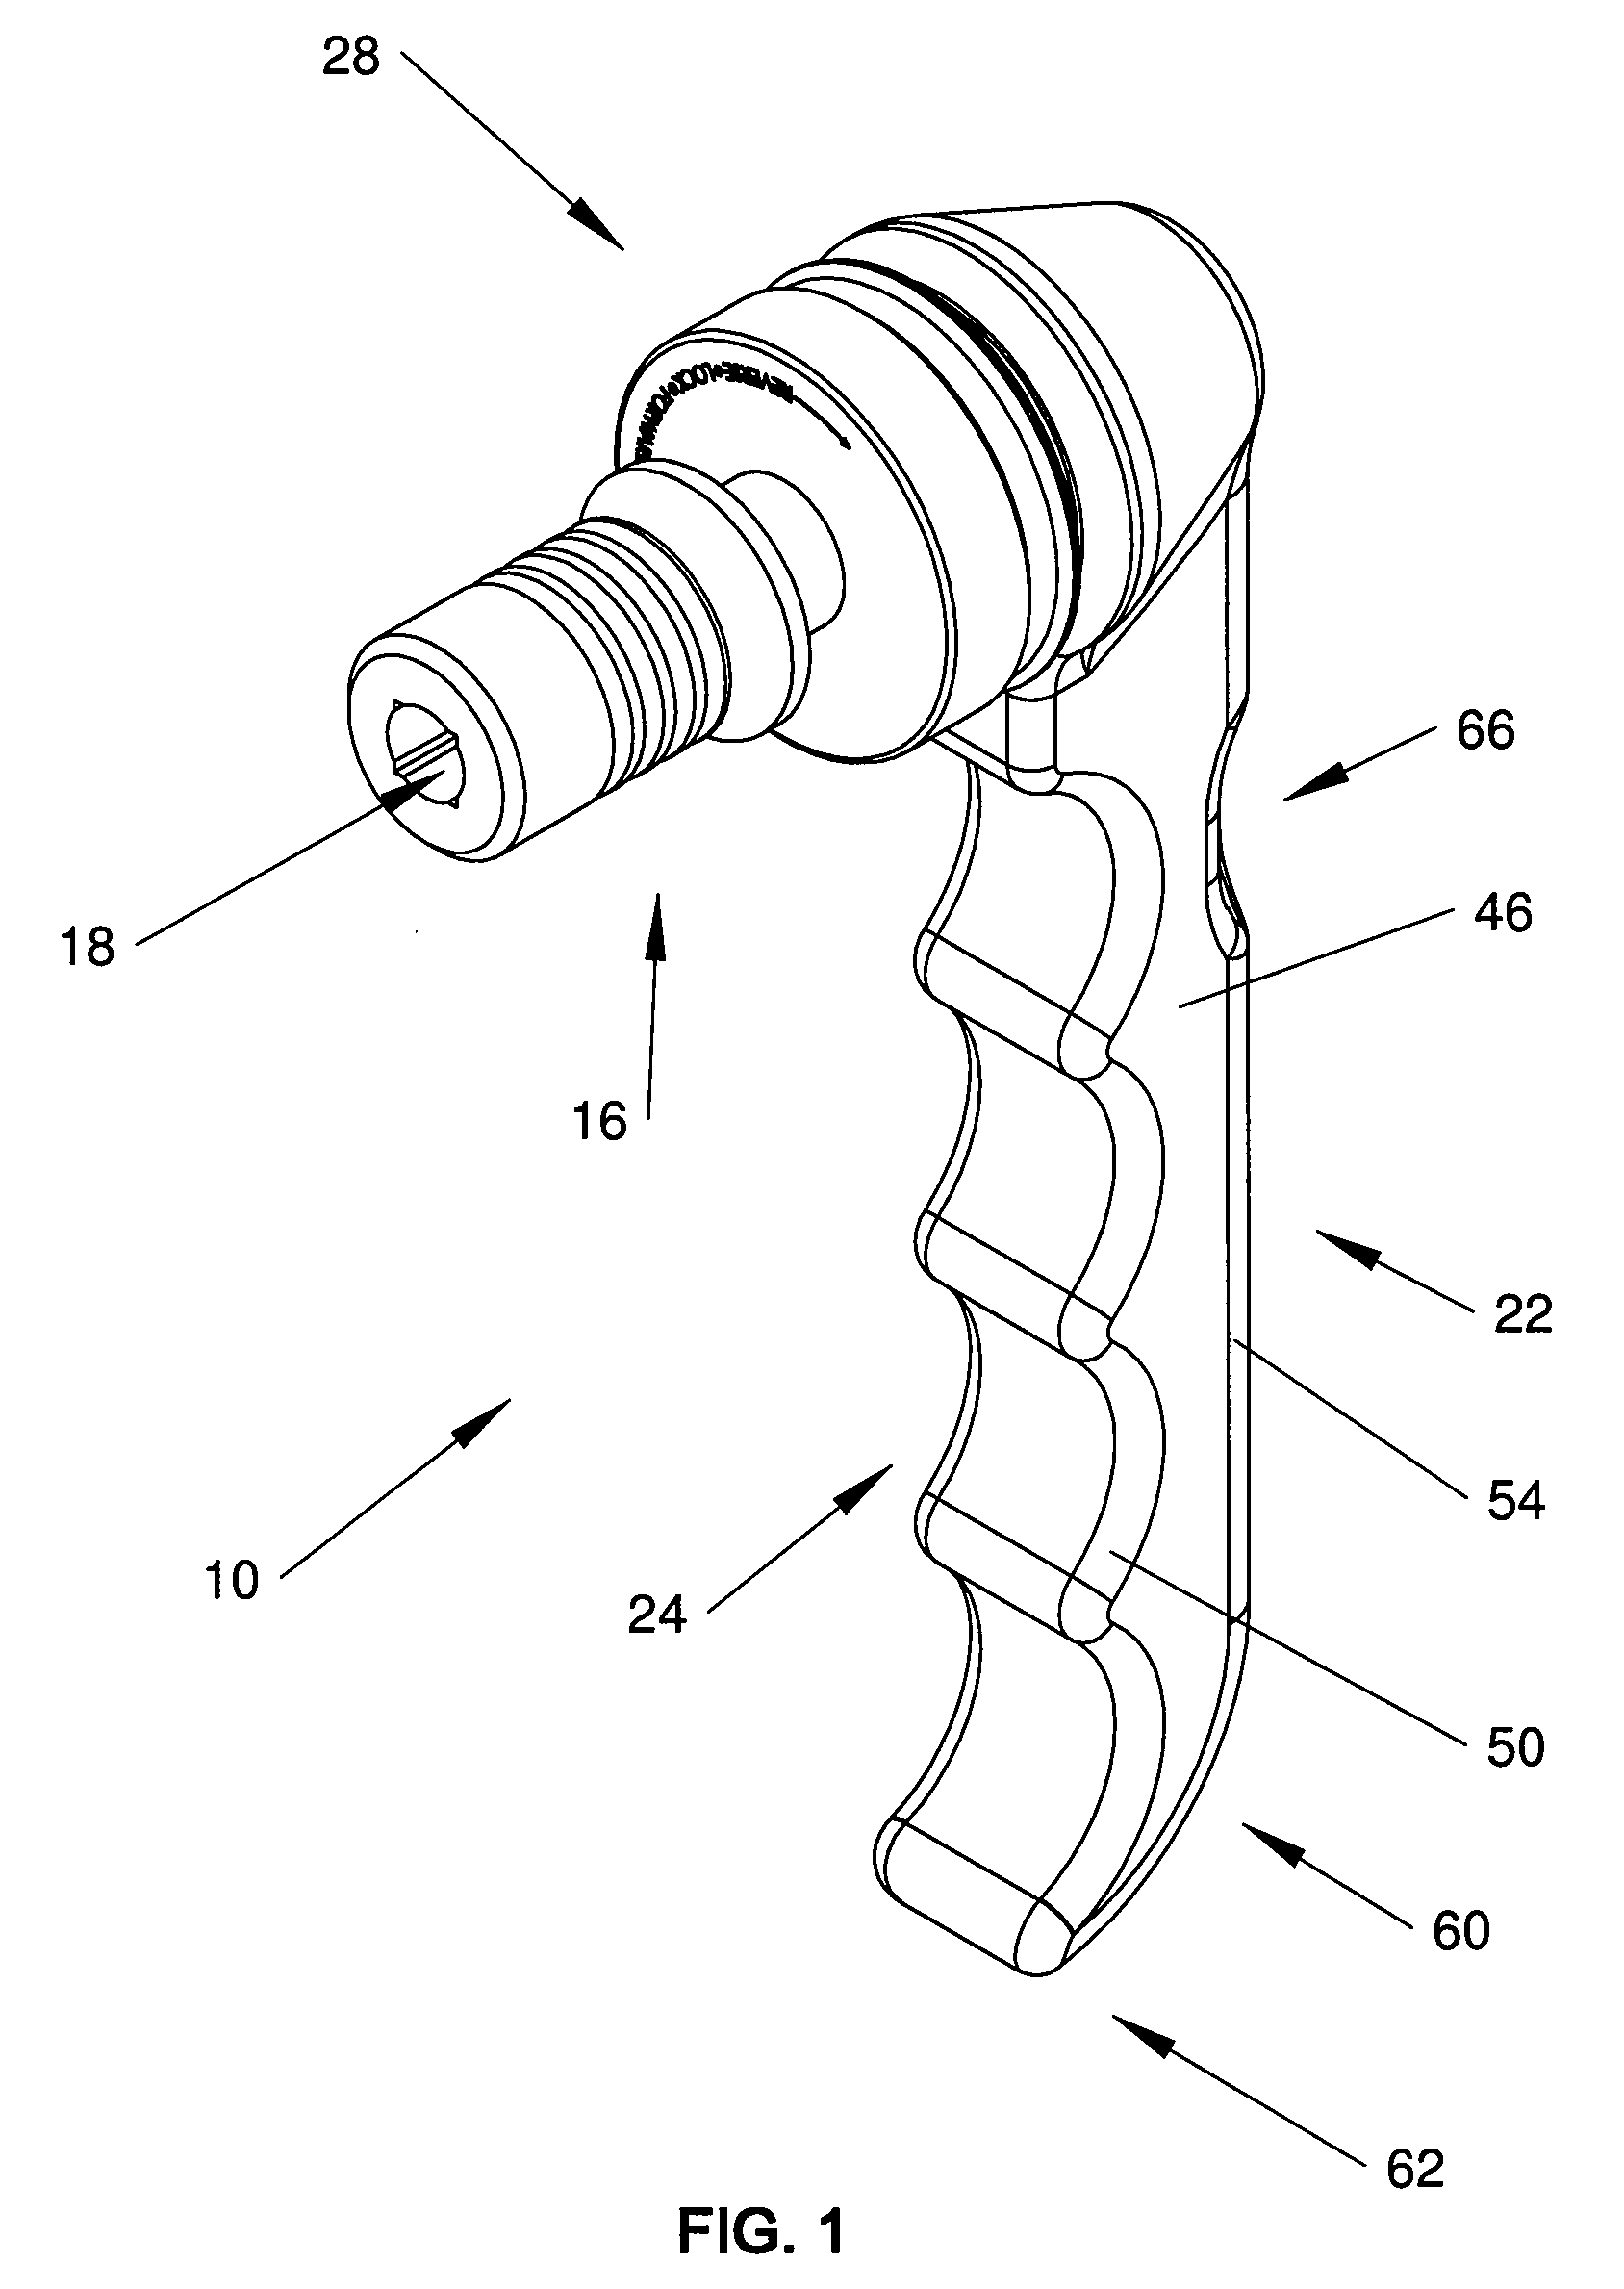 Ratcheting mechanical driver for cannulated surgical systems